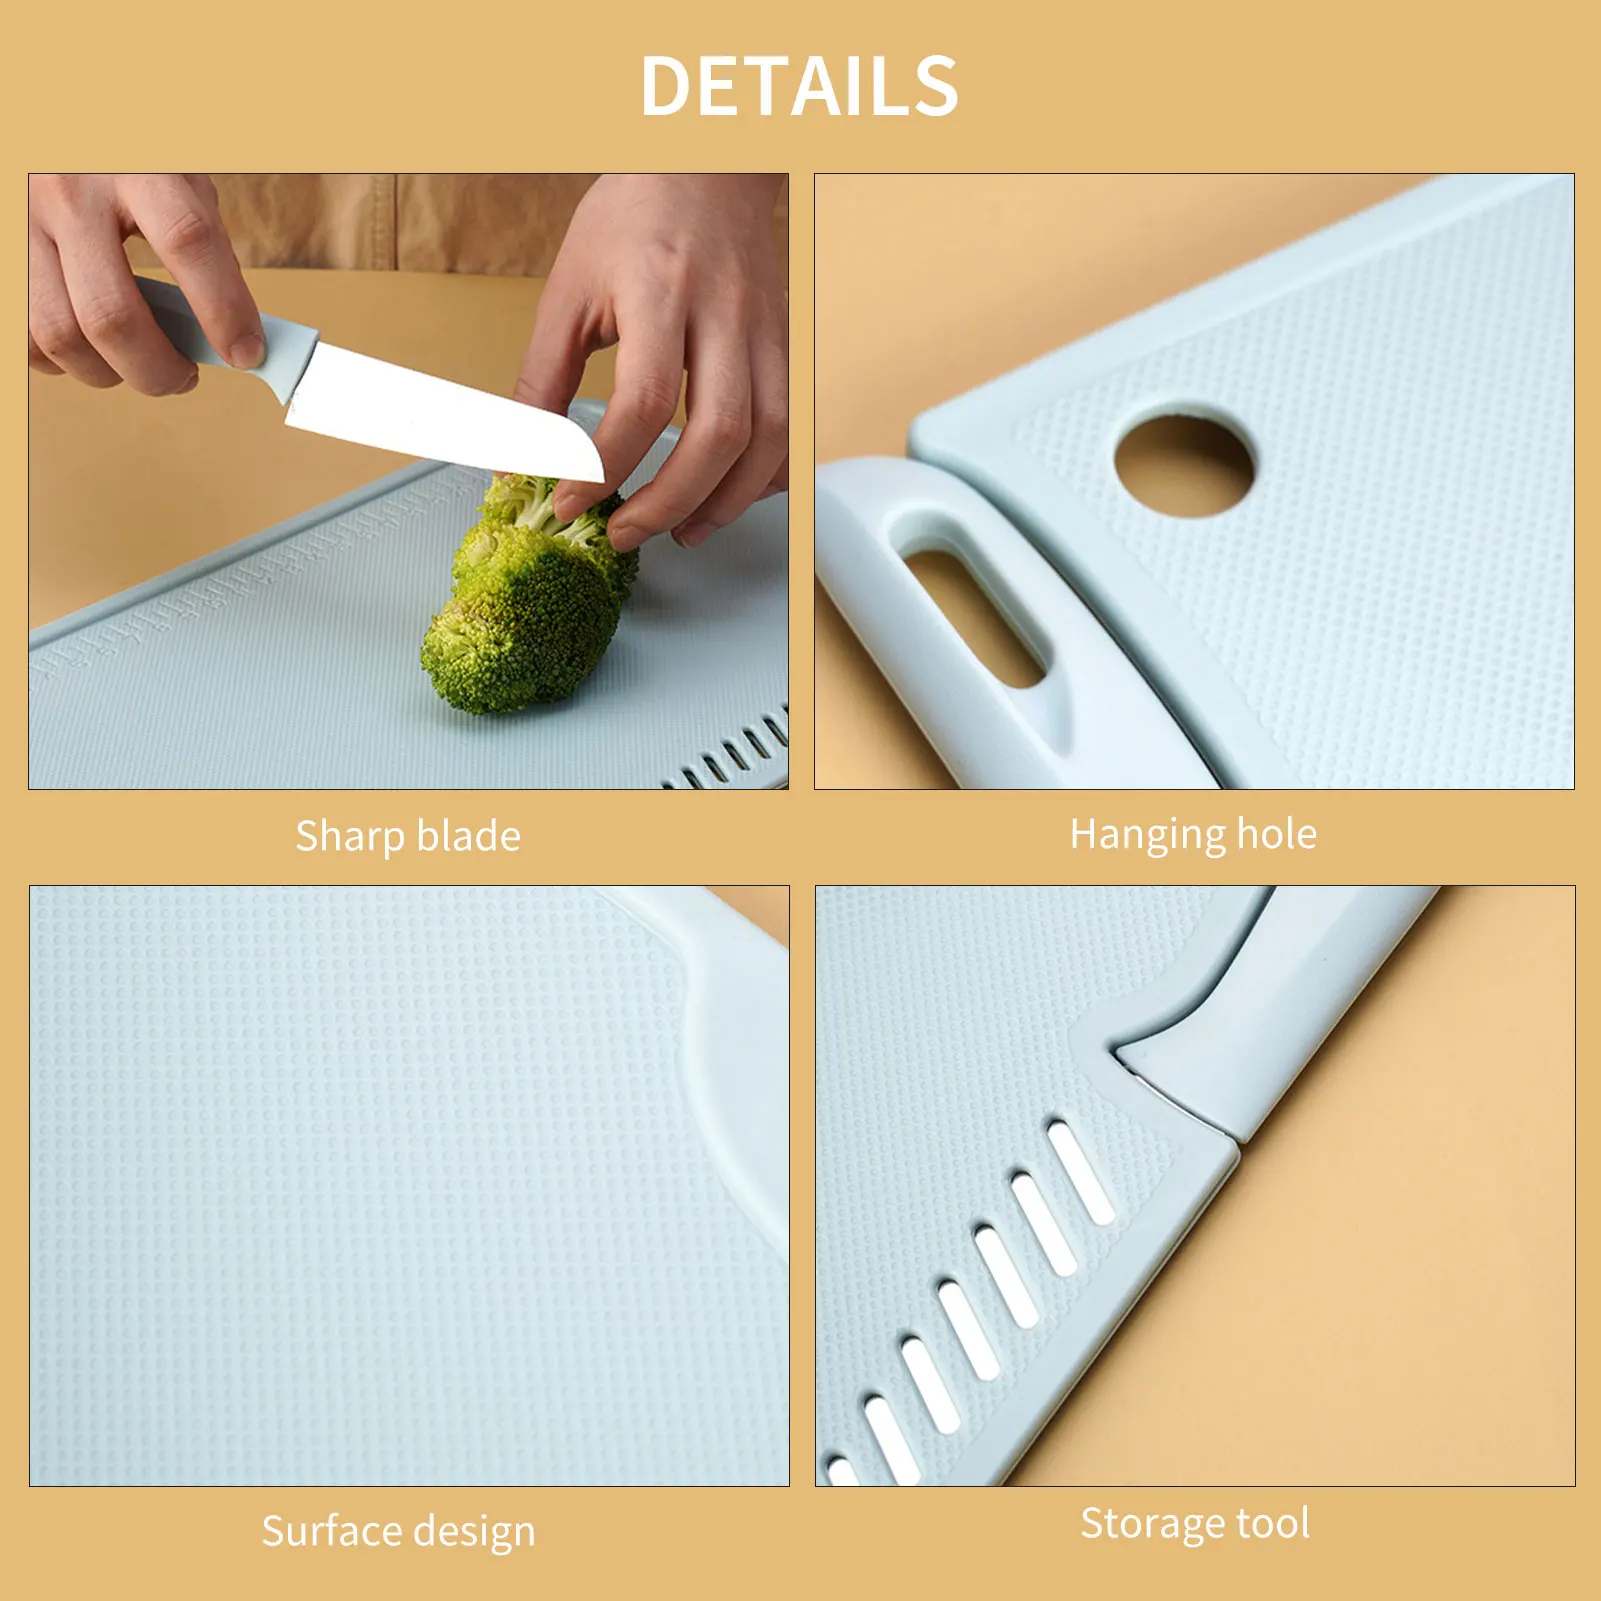 https://ae01.alicdn.com/kf/Sb41eb0c8aff047e2af4a119893e290f0T/Knife-And-Cutting-Board-Set-For-Small-House-Rent-House-Dormitory-Cooking-Cheap-Light-Small-Dish.jpg